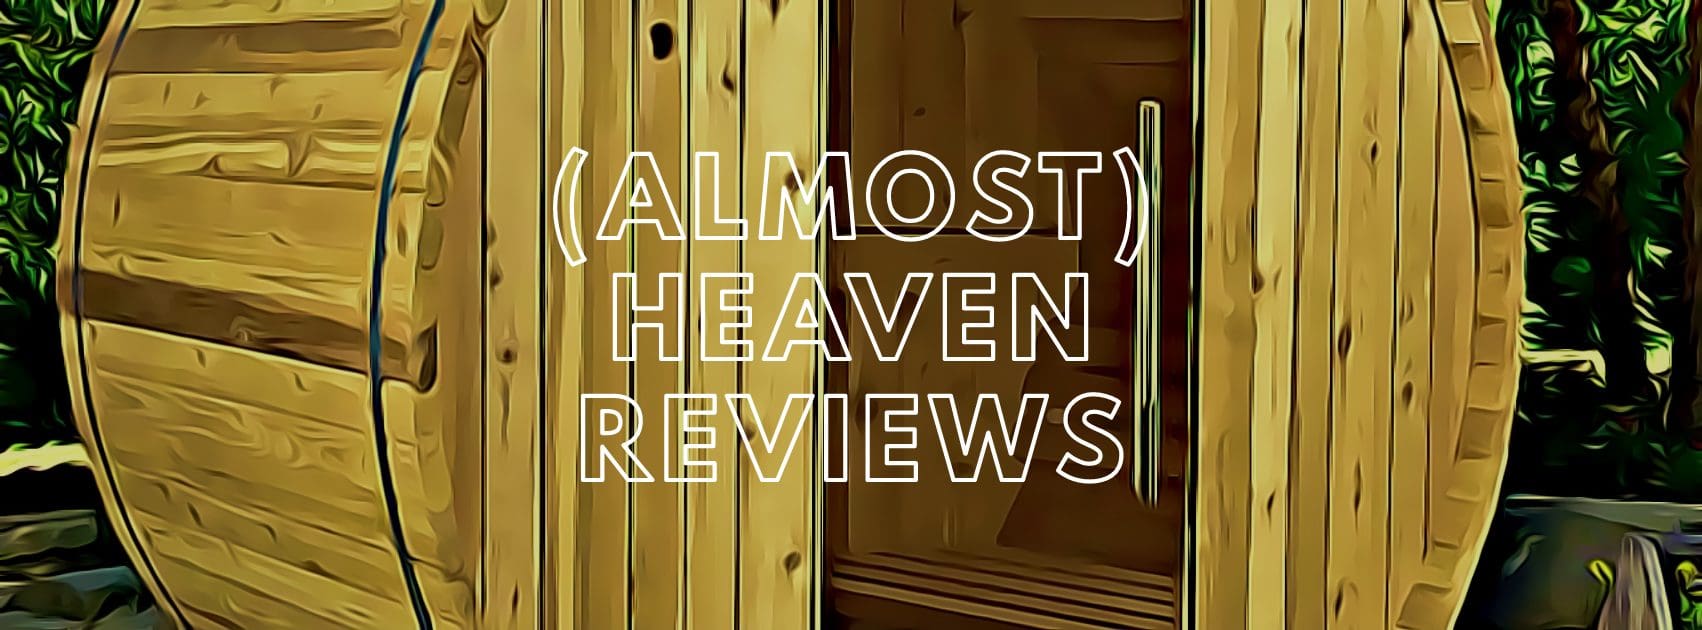 ALMOST HEAVEN REVIEWS